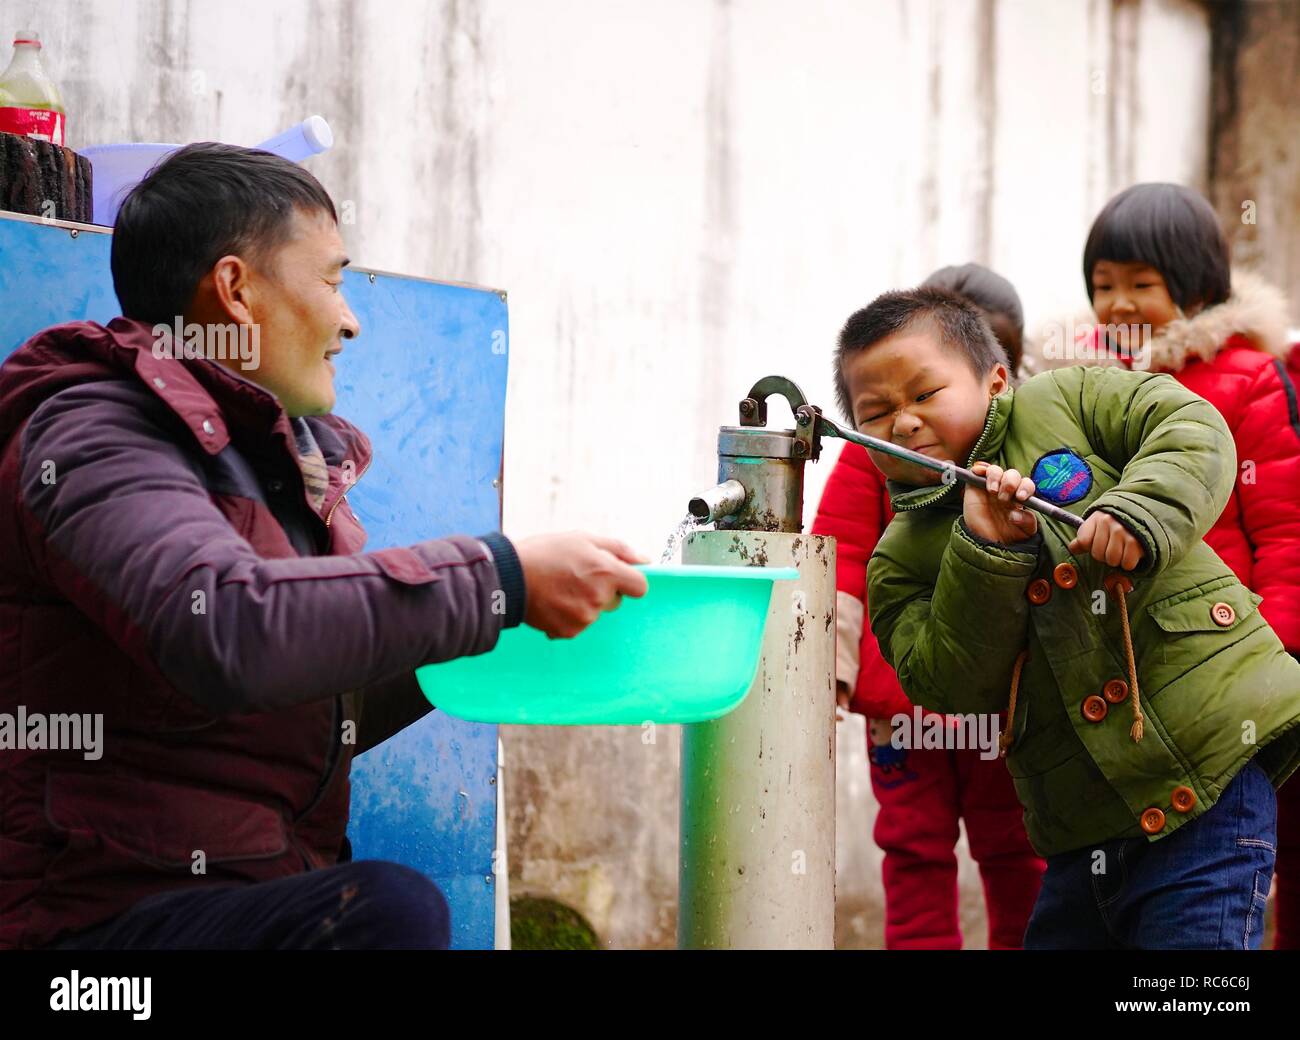 (190114) -- NANCHANG, Jan. 14, 2019 (Xinhua) -- A student helps principal Zhang Zhanliang pump water at Huangni elementary school in Chuntao Town of Yujiang District of Yingtan City, east China's Jiangxi Province, Jan. 3, 2019. Zhang Zhanliang, the principal of Huangni primary school, has been known nationwide recently for taking care of the school's left-behind children, whose parents are migrant workers in towns and cities. For years, there's no canteen at Huangni elementary school. Appointed as principal in 2018, Zhang Zhanliang spent his own money cooking additional meal for these left-beh Stock Photo